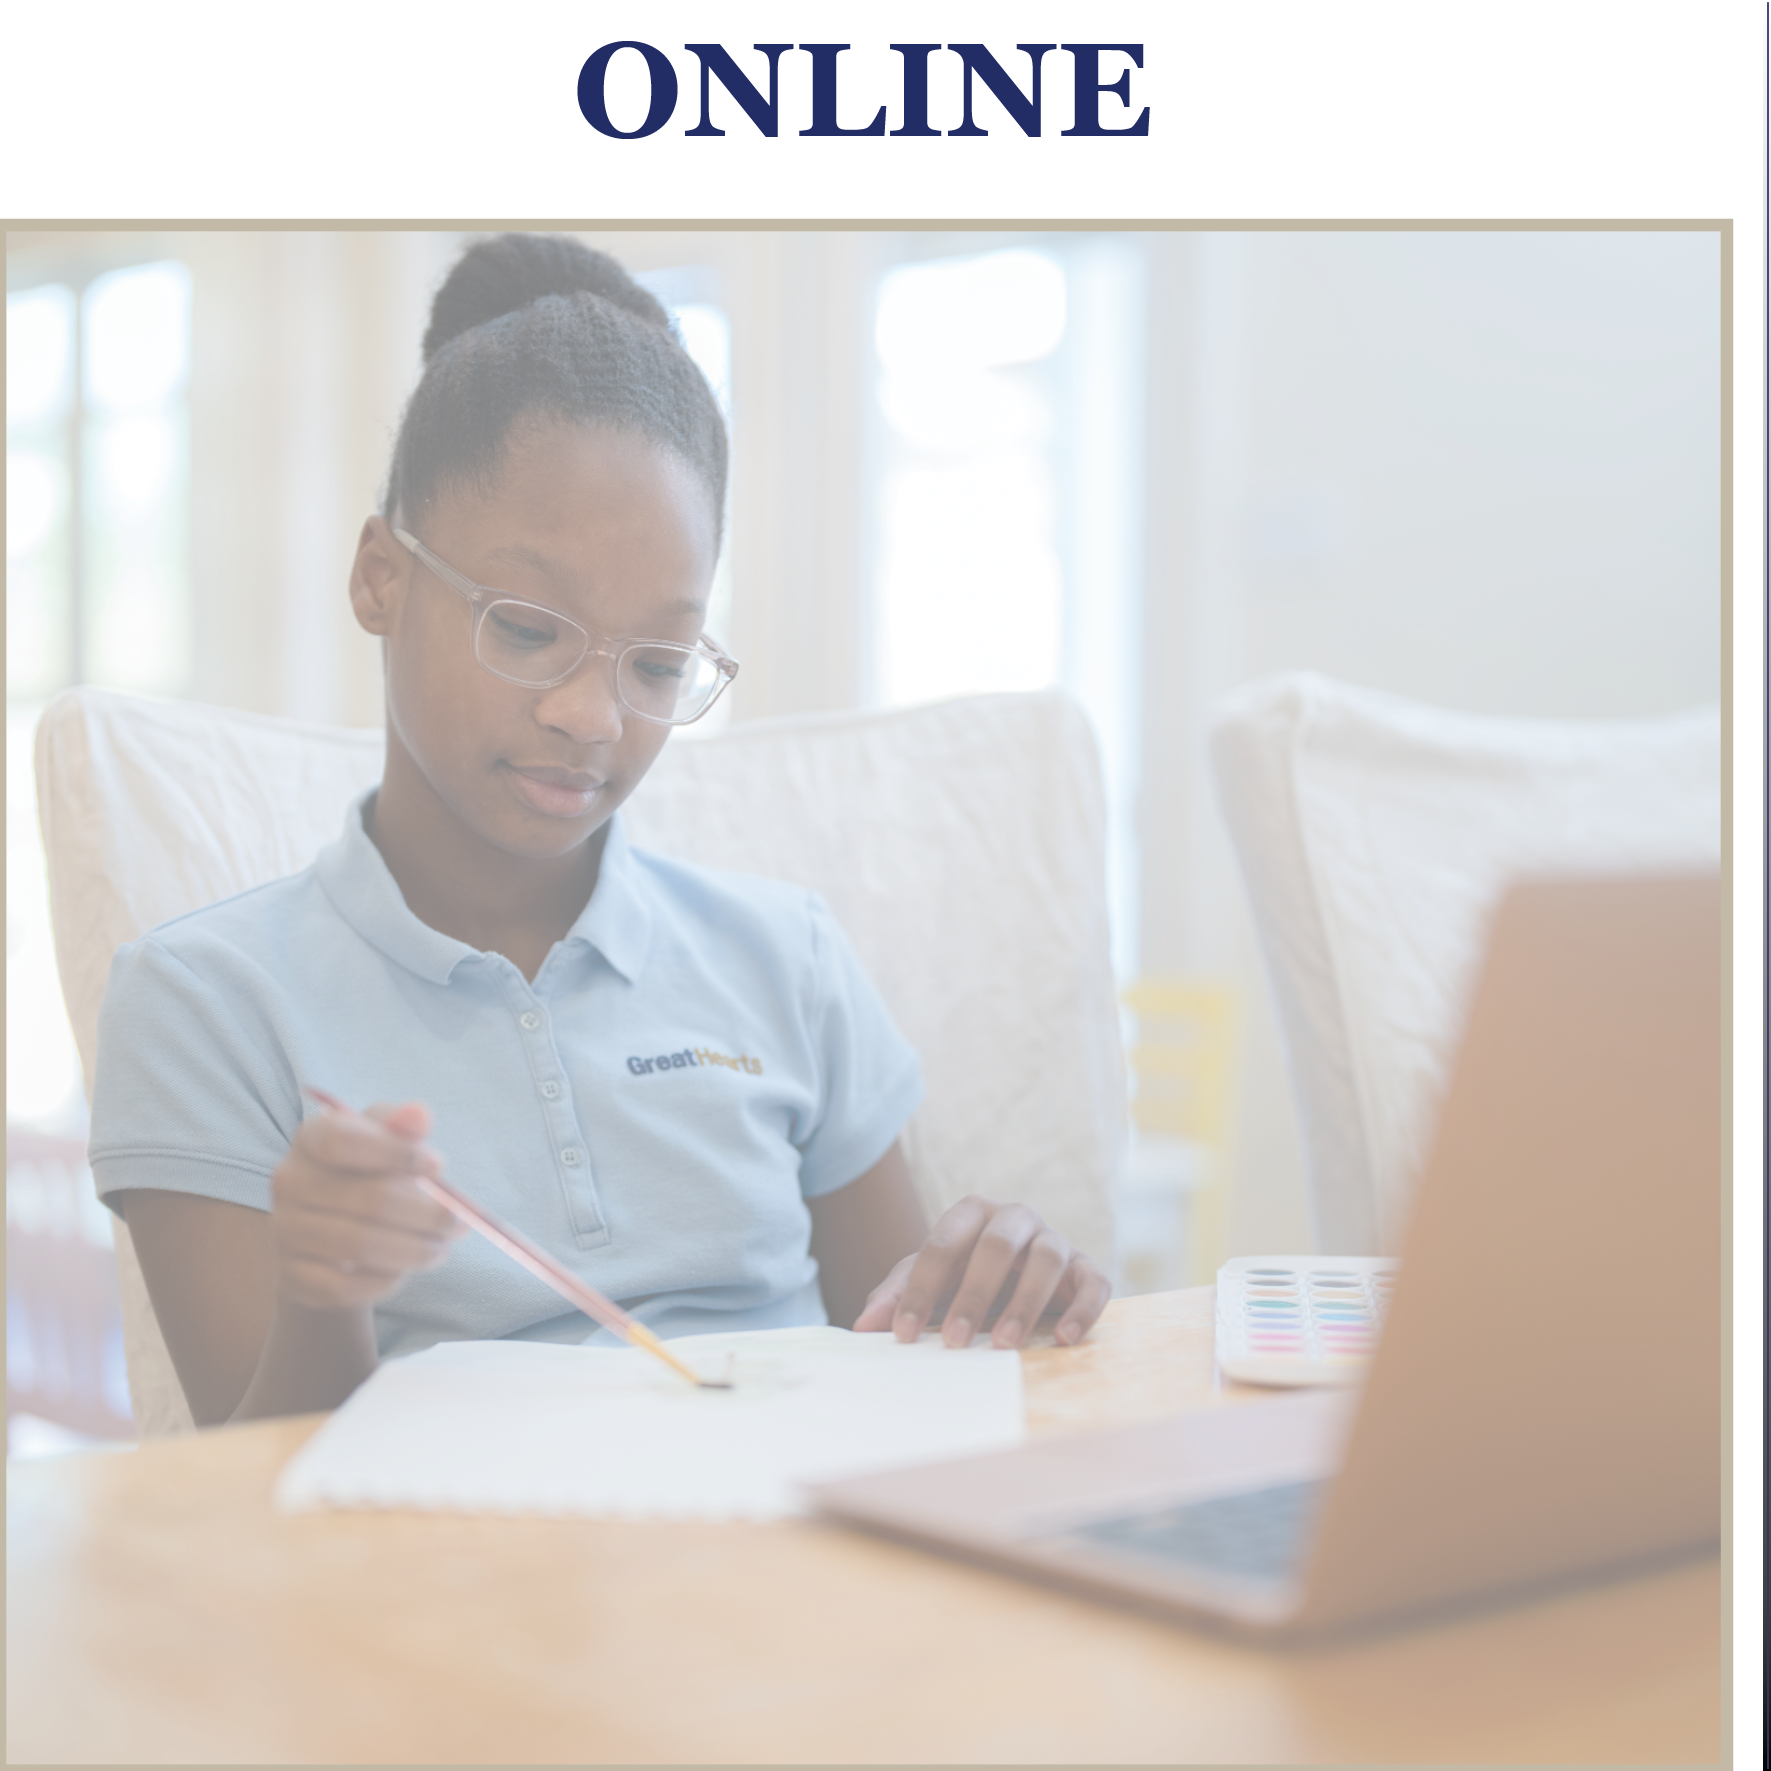 great hearts online, girl studying on computer